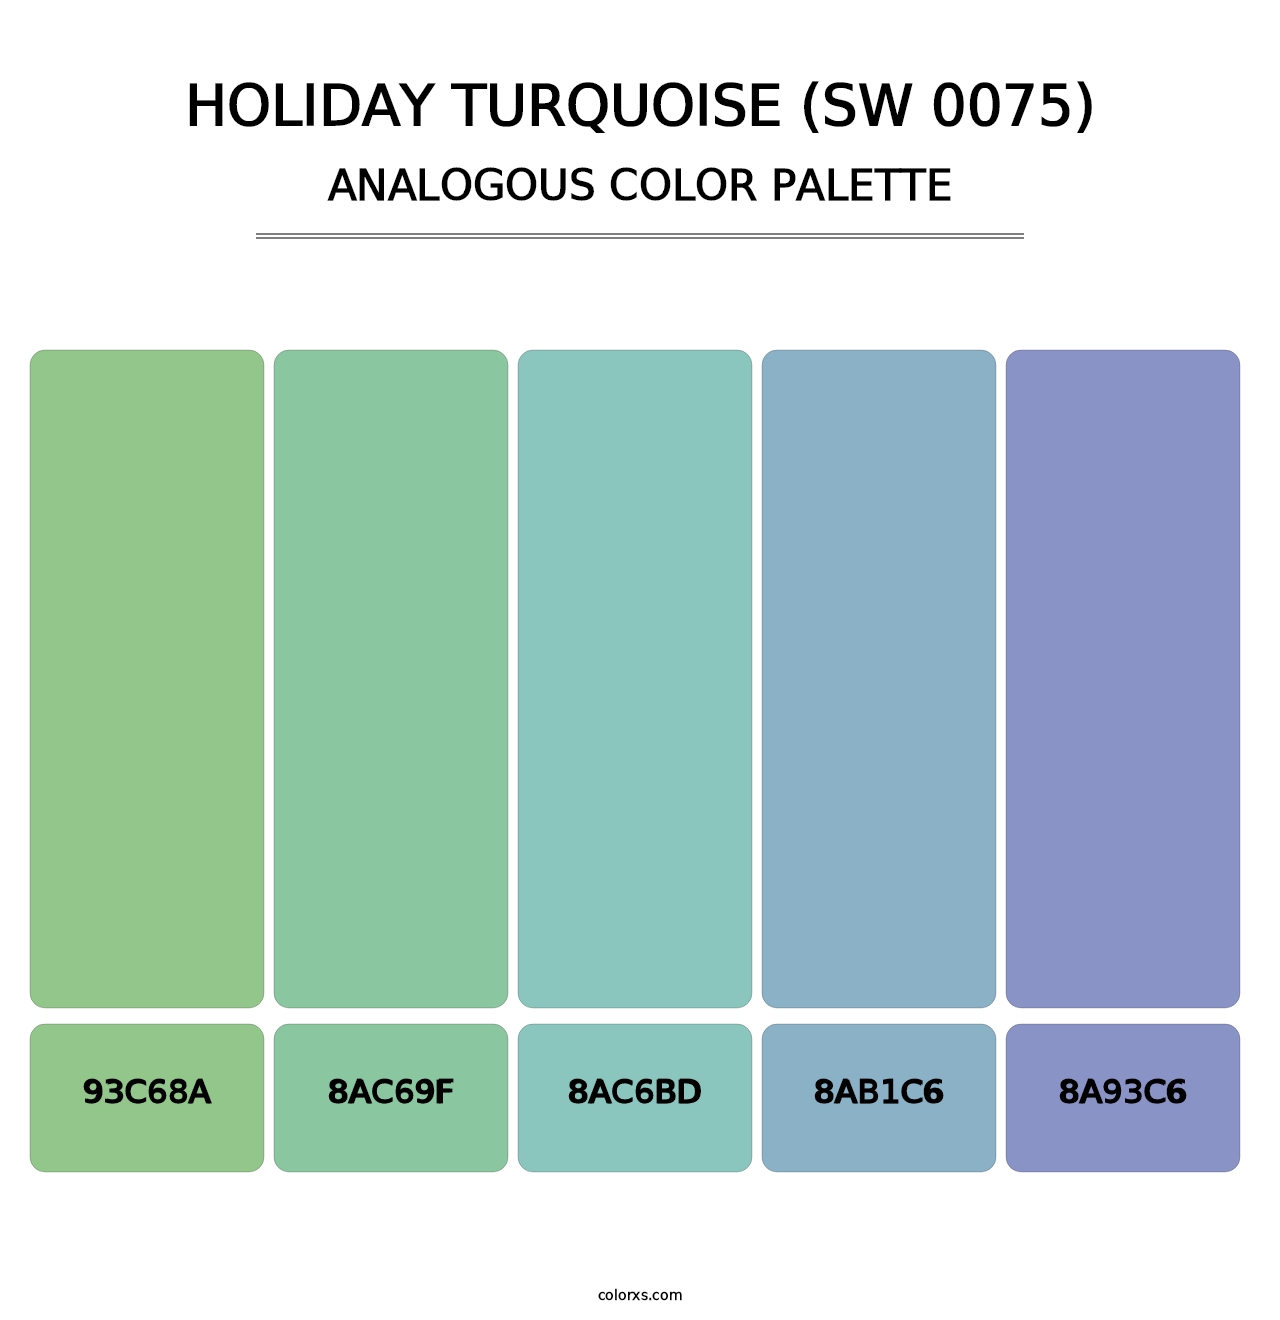 Holiday Turquoise (SW 0075) - Analogous Color Palette